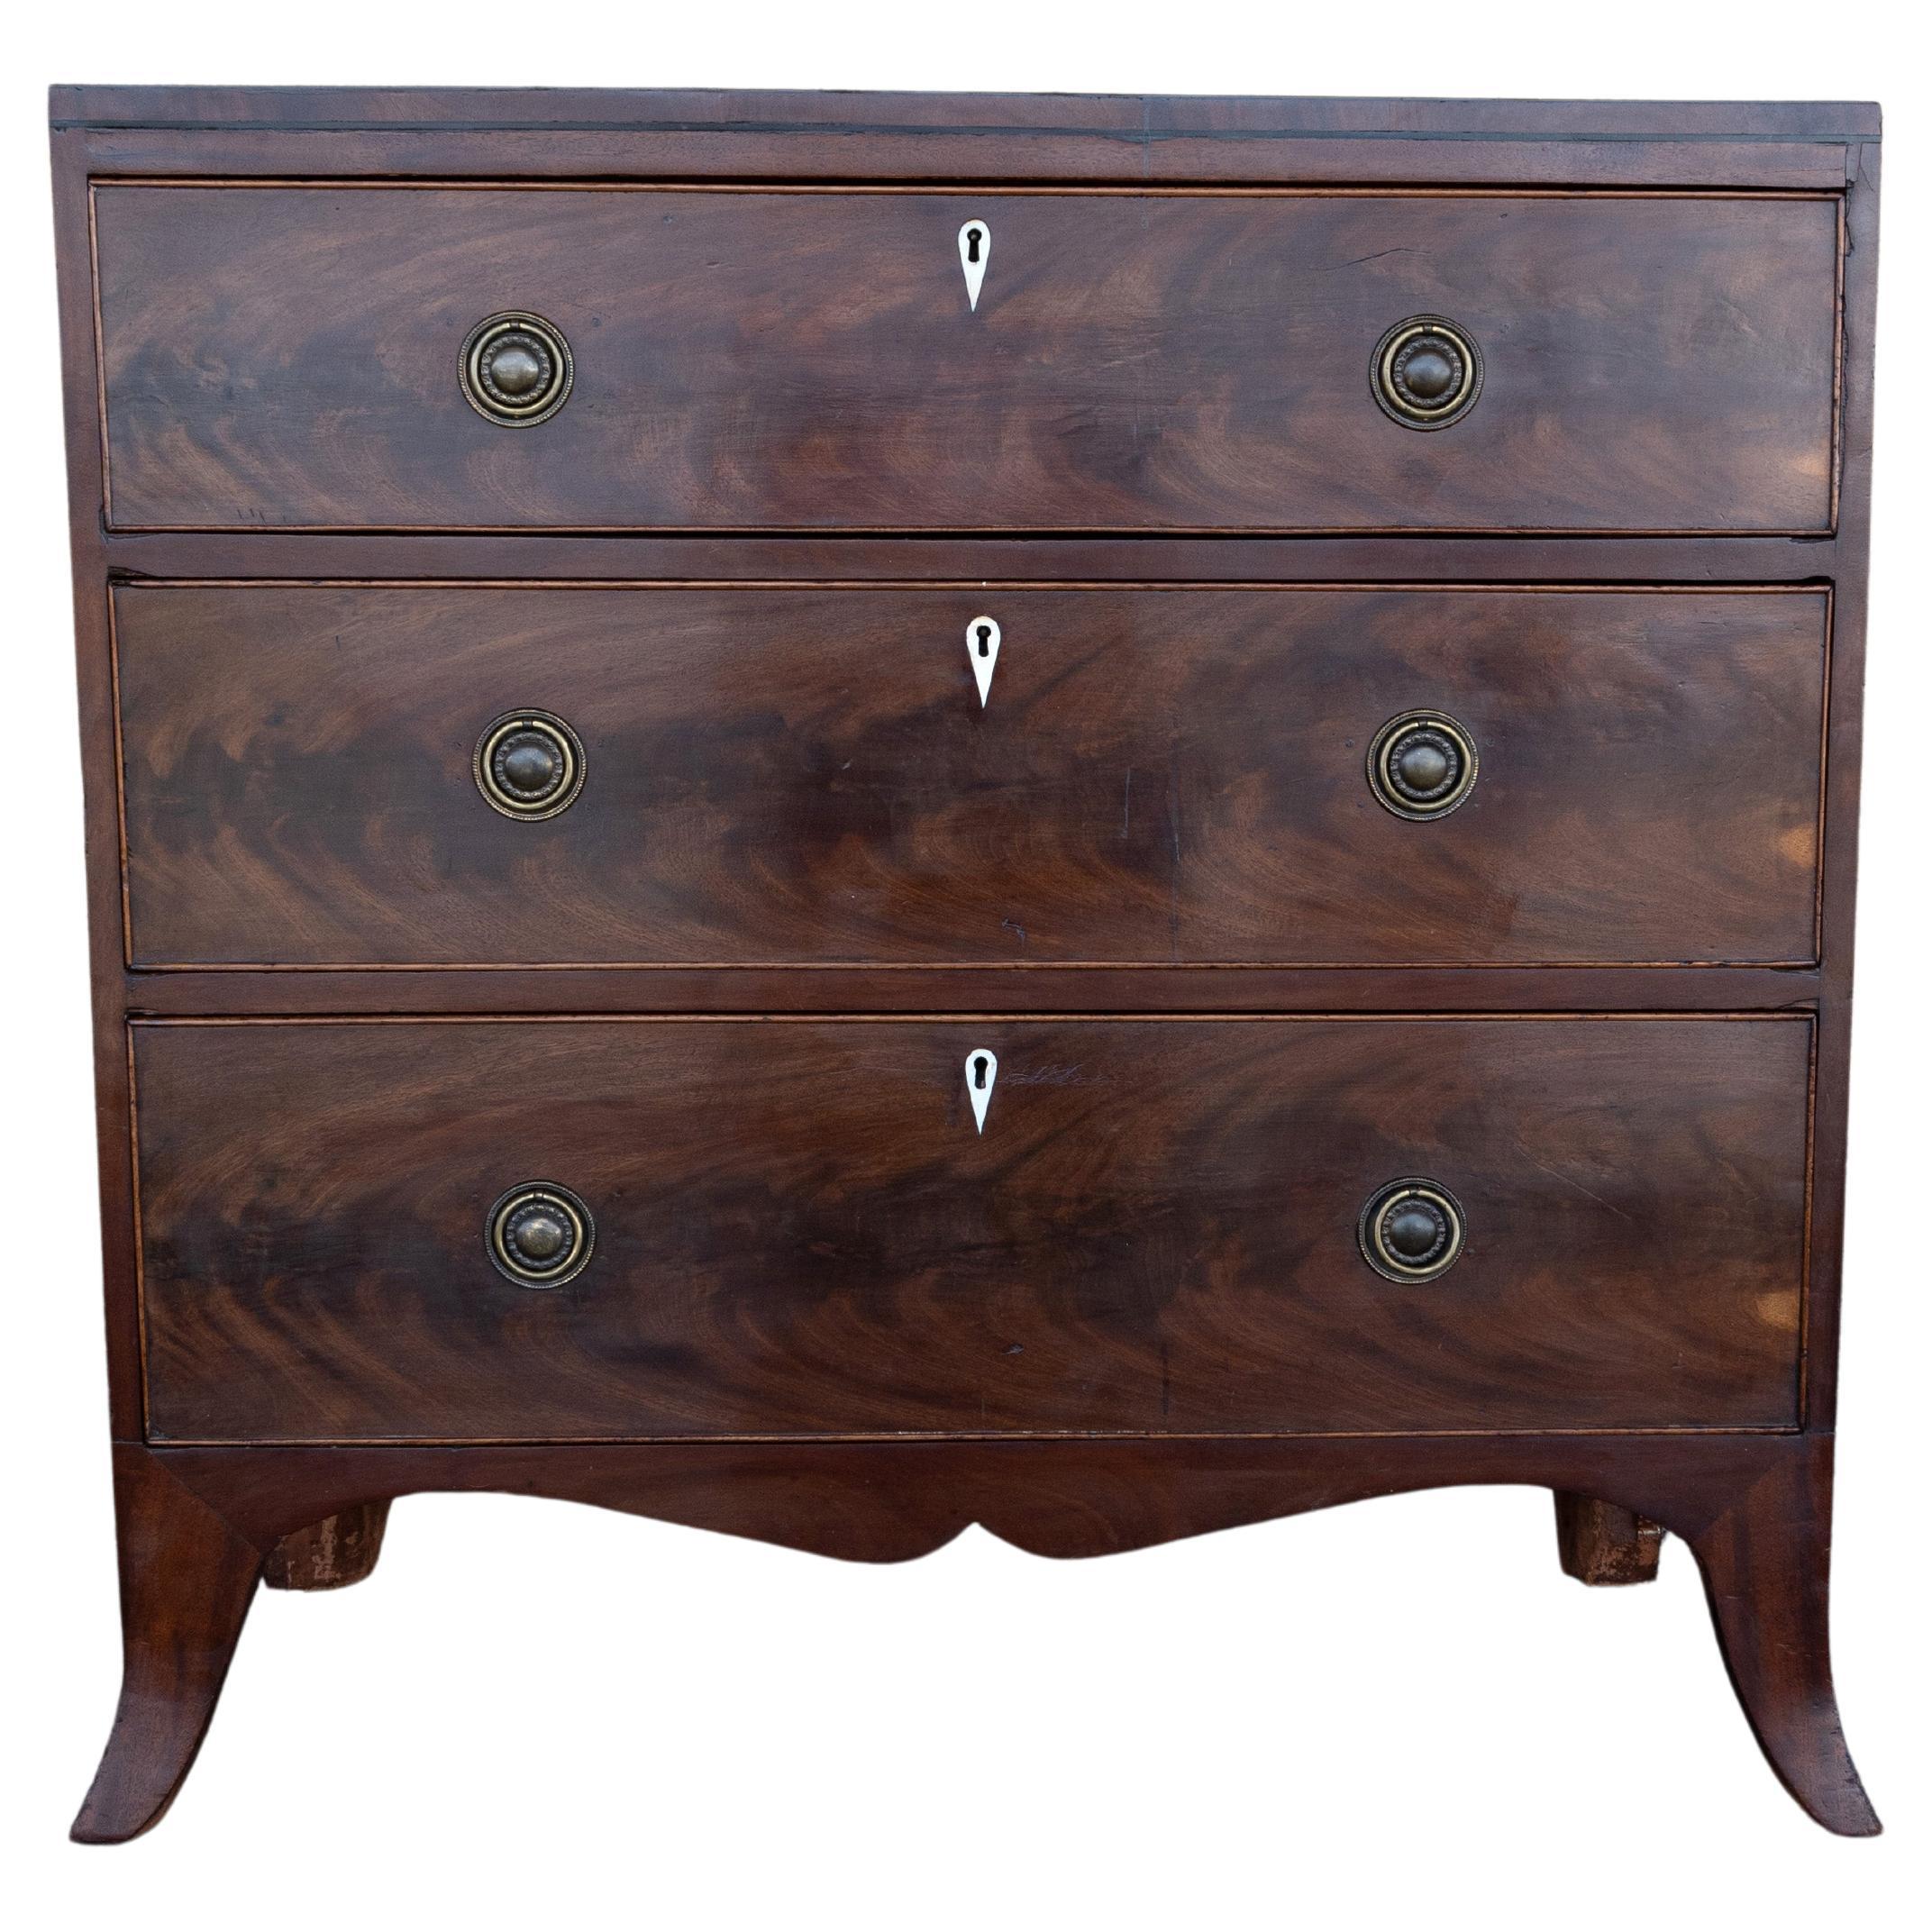 Antique English 19th Century Regency Diminutive Chest Of Drawers C.1810 In Good Condition For Sale In London, GB